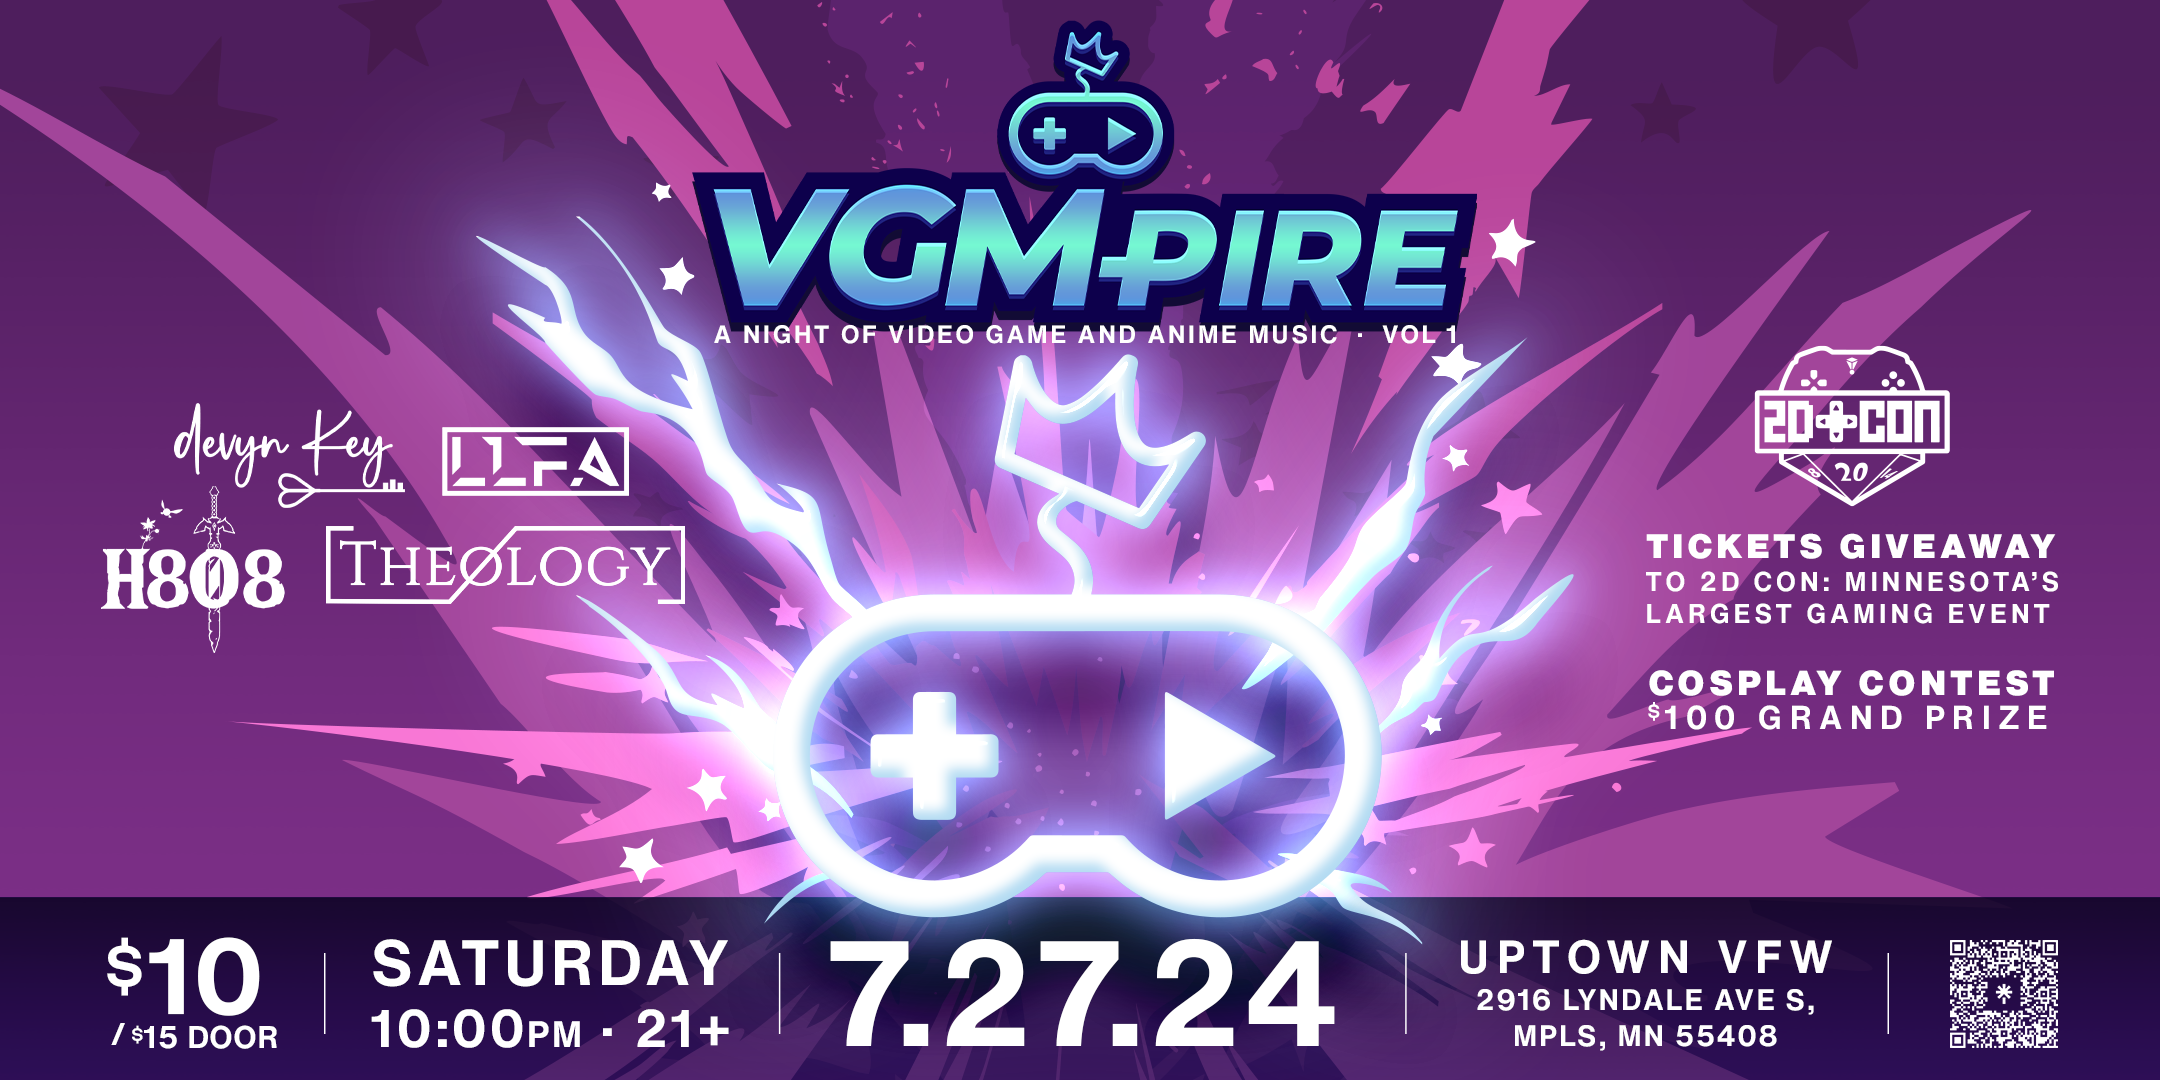 VGMpire :: A Night of Video Game & Anime Music Vol. 1 Theology | H808 | LLFA | Devyn Key + cosplay contest + tickets giveaway to 2D CON Saturday July 27 James Ballentine "Uptown" VFW Post 246 2916 Lyndale Ave S Mpls Doors 10pm : : Music 10pm : : 21+ GA: $10 ADV / $15 DOS Tickets on Sale Now